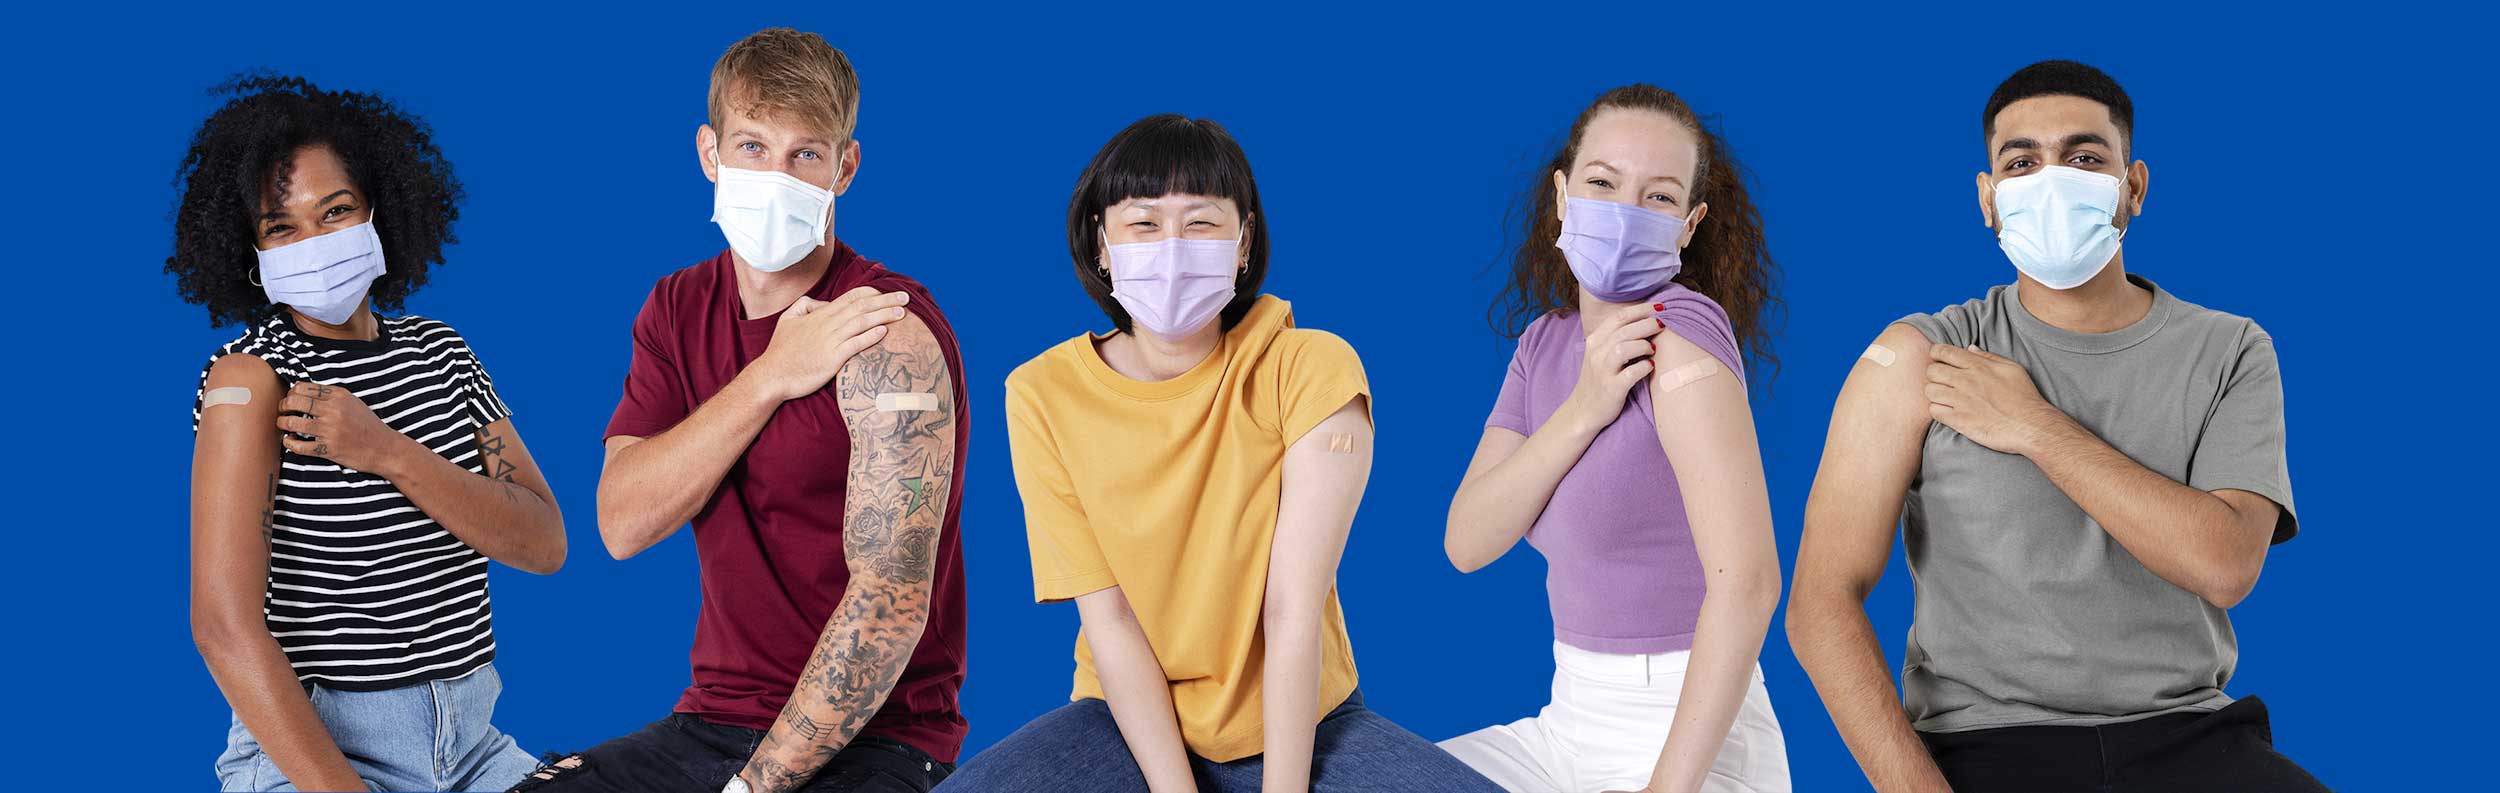  students wearing face masks and showing their arms with a bandage from vaccination (Image by rawpixel.com) 